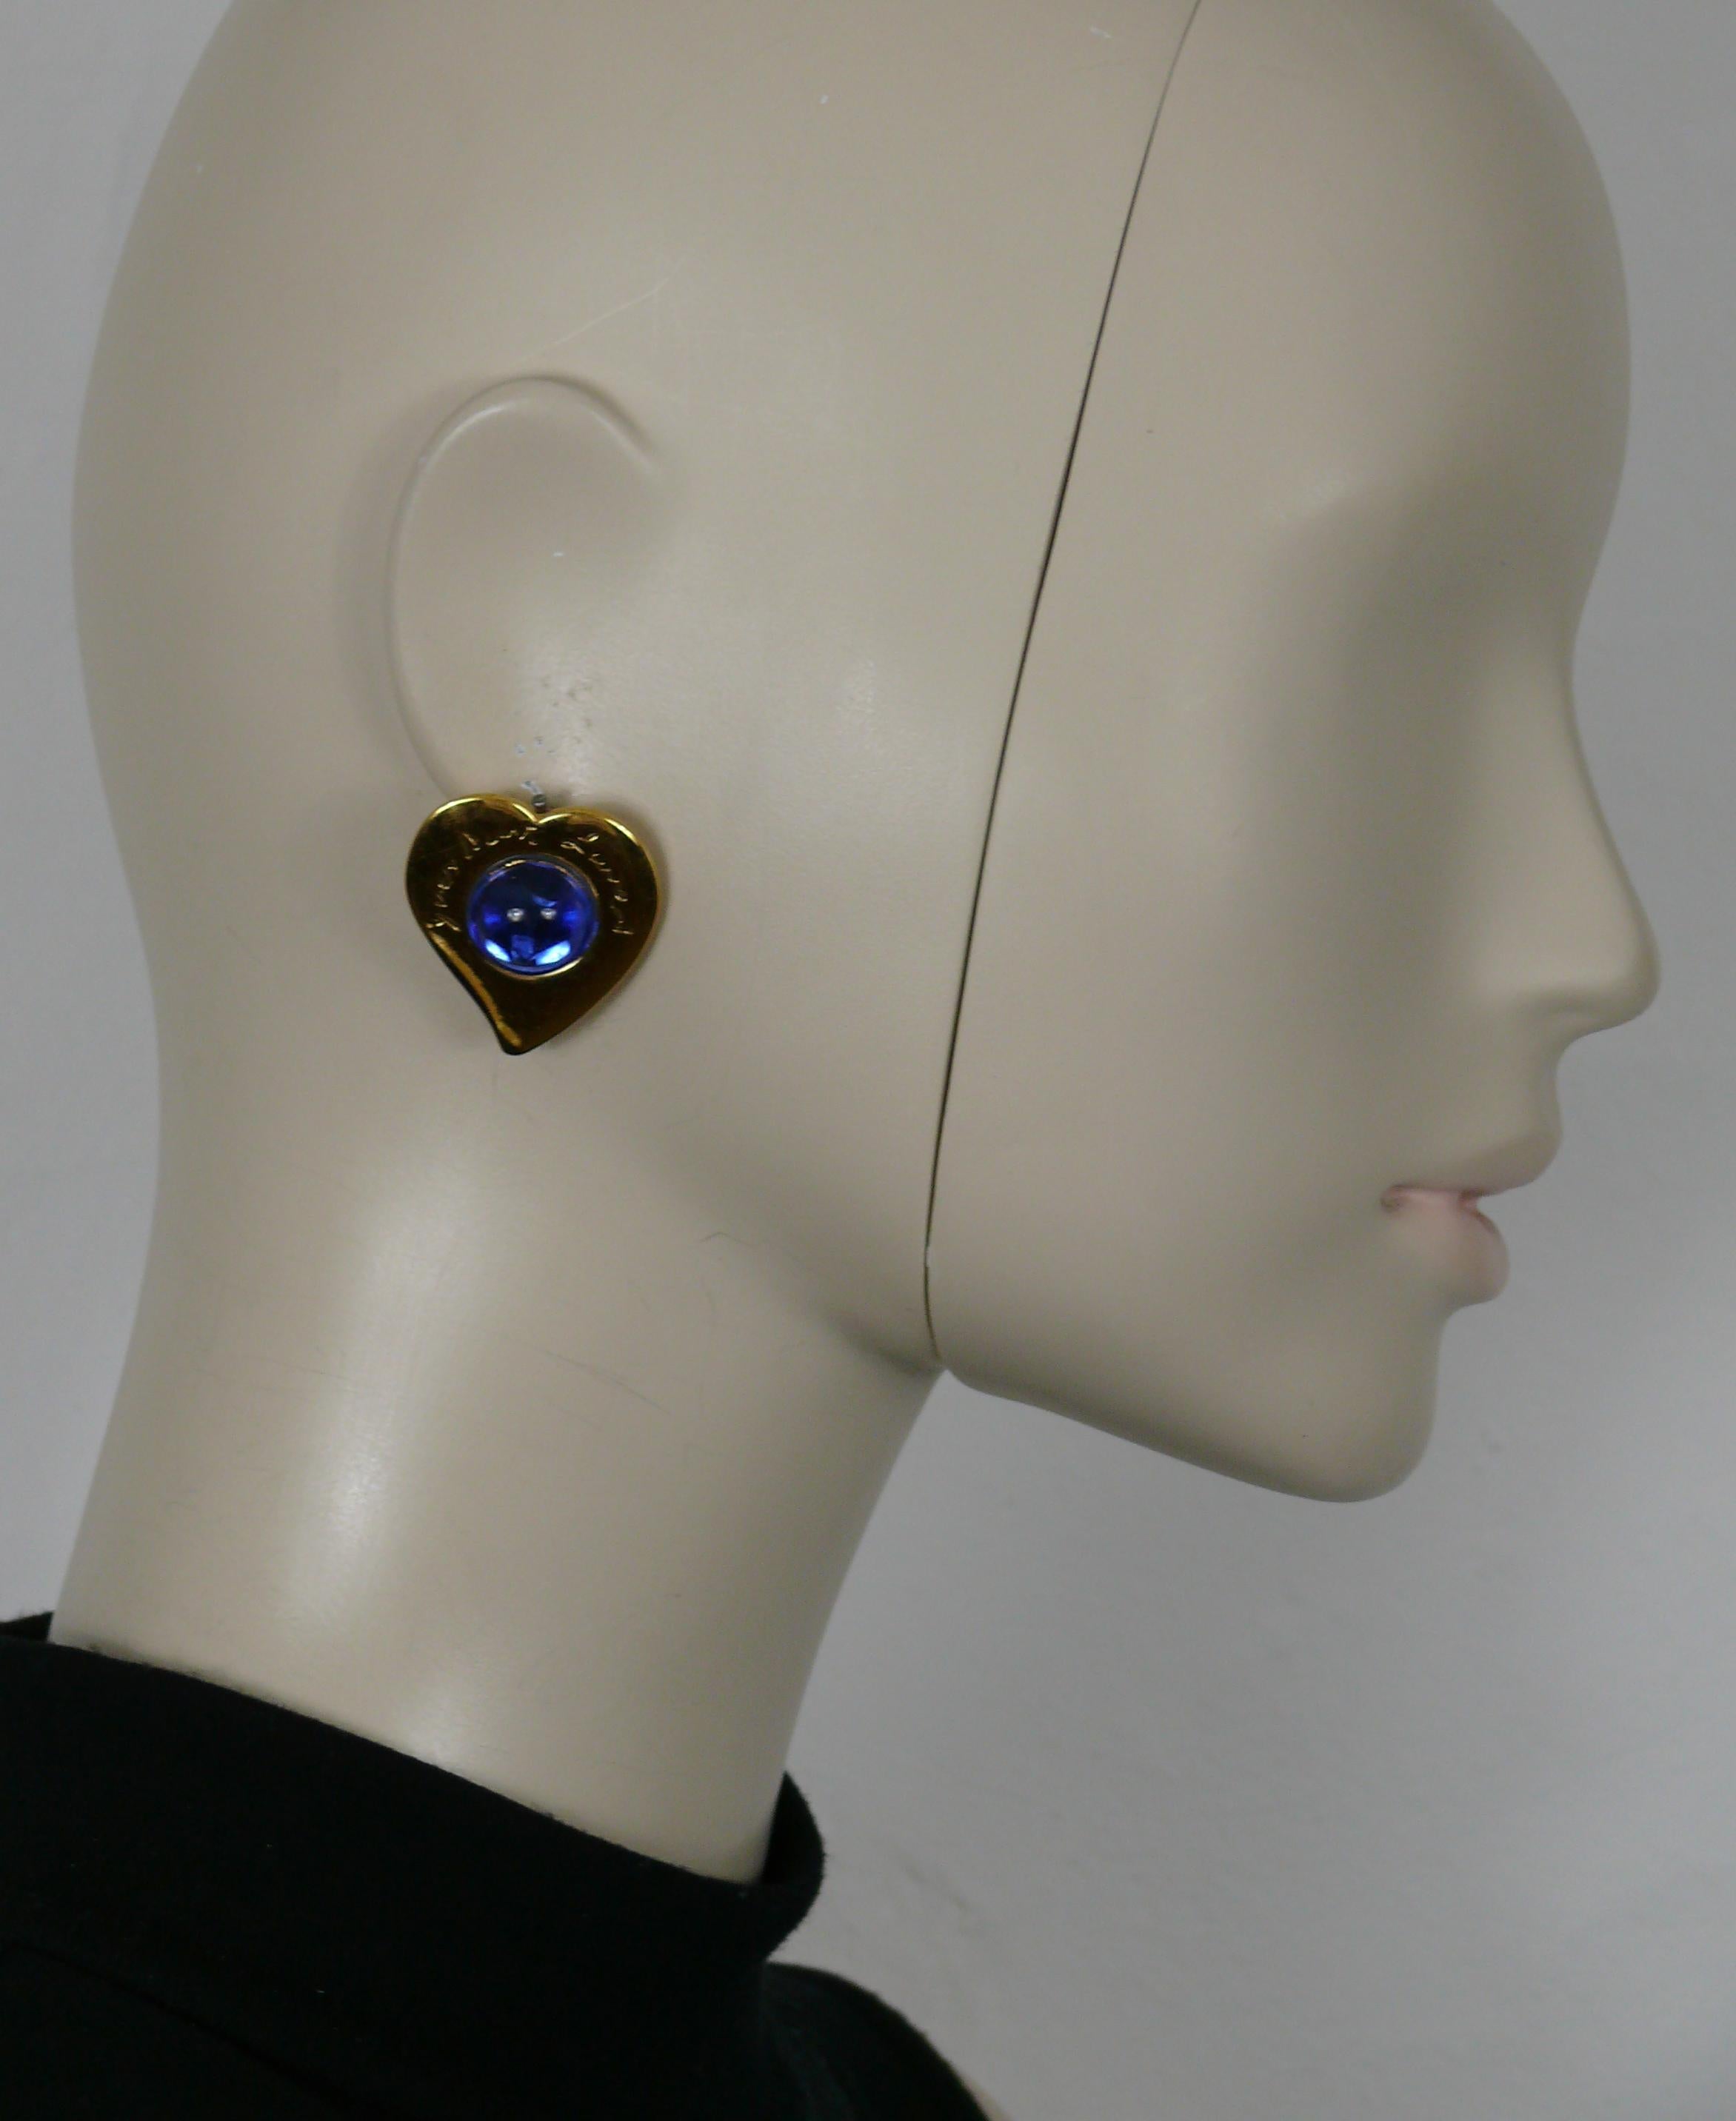 YVES SAINT LAURENT vintage gold tone heart clip-on earrings embellished with a blue glass cabochon and embossed with cursive YVES SAINT LAURENT signature.

Embossed YSL Made in France.

Indicative measurements : height approx. 3.2 cm (1.26 inches) /